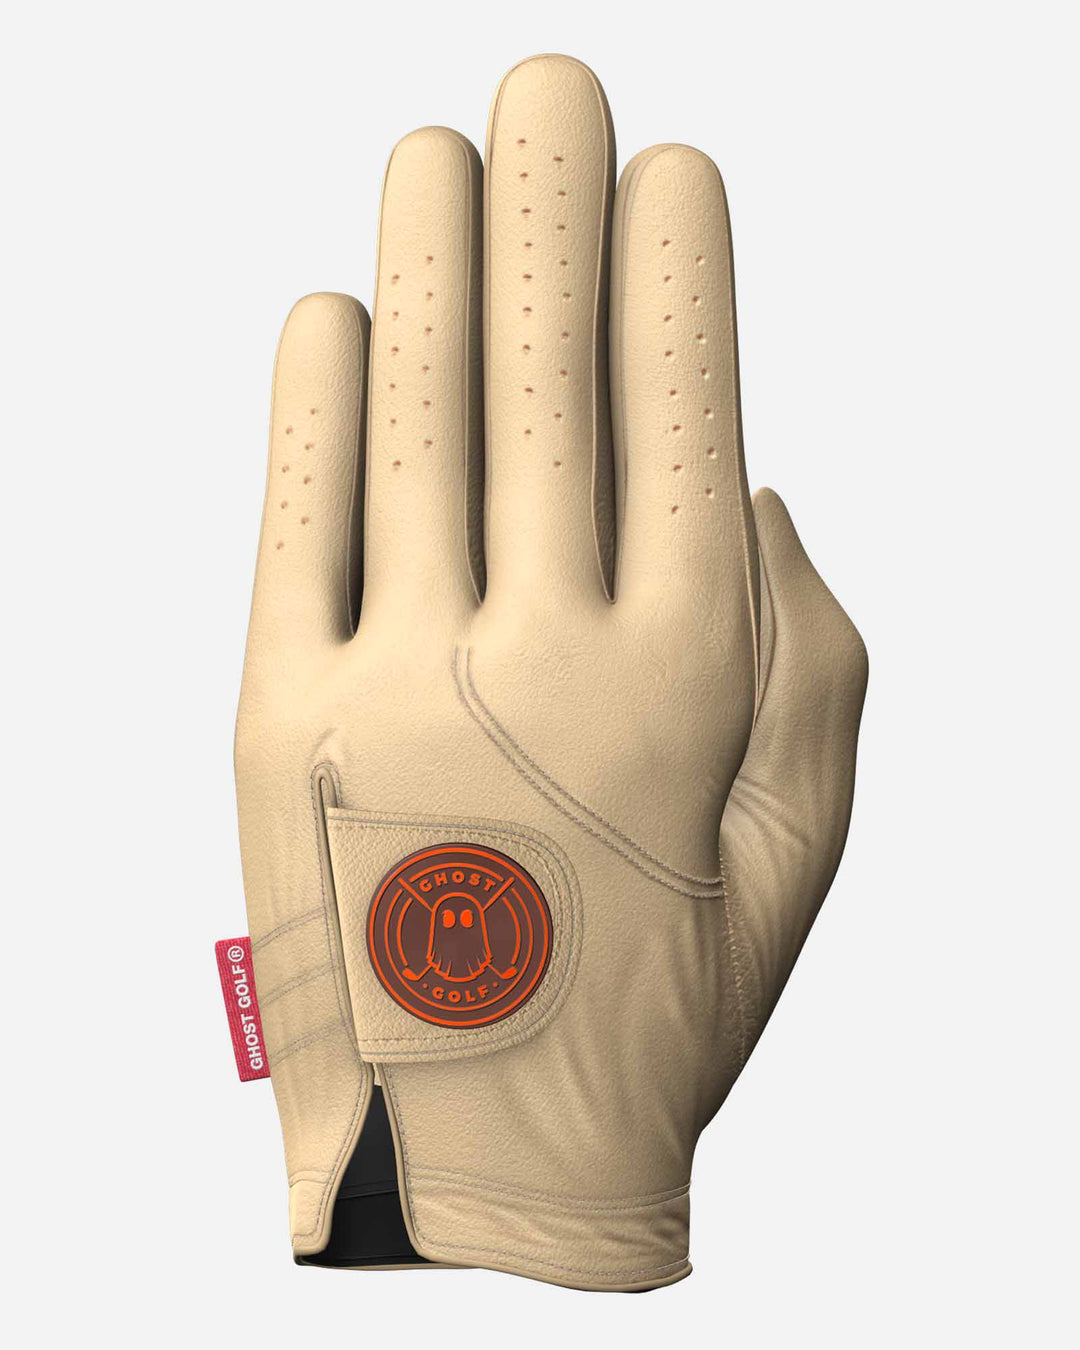 Ghost Golf AAA Cabretta Golf Glove Color Sand